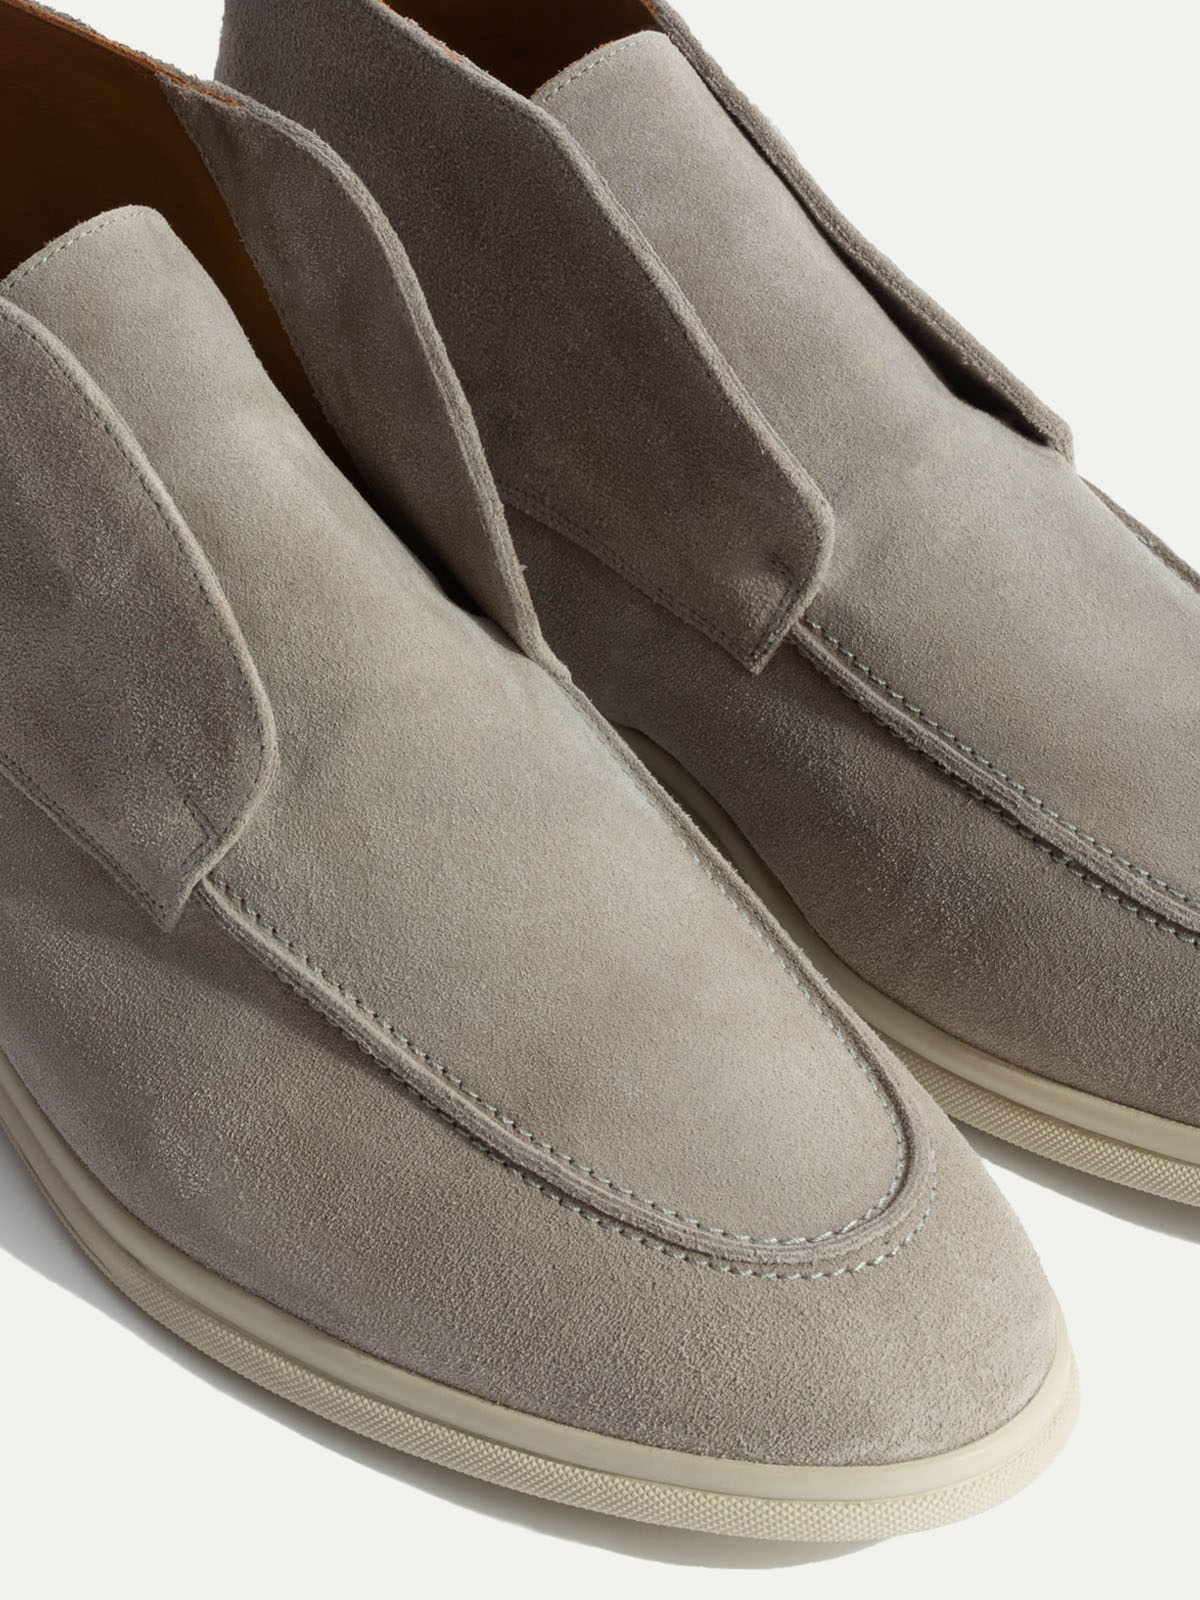 mid-top loafers, mid-top grey loafers, grey high loafers, mocassins gris mi-hauts, mid top grey slip-ons